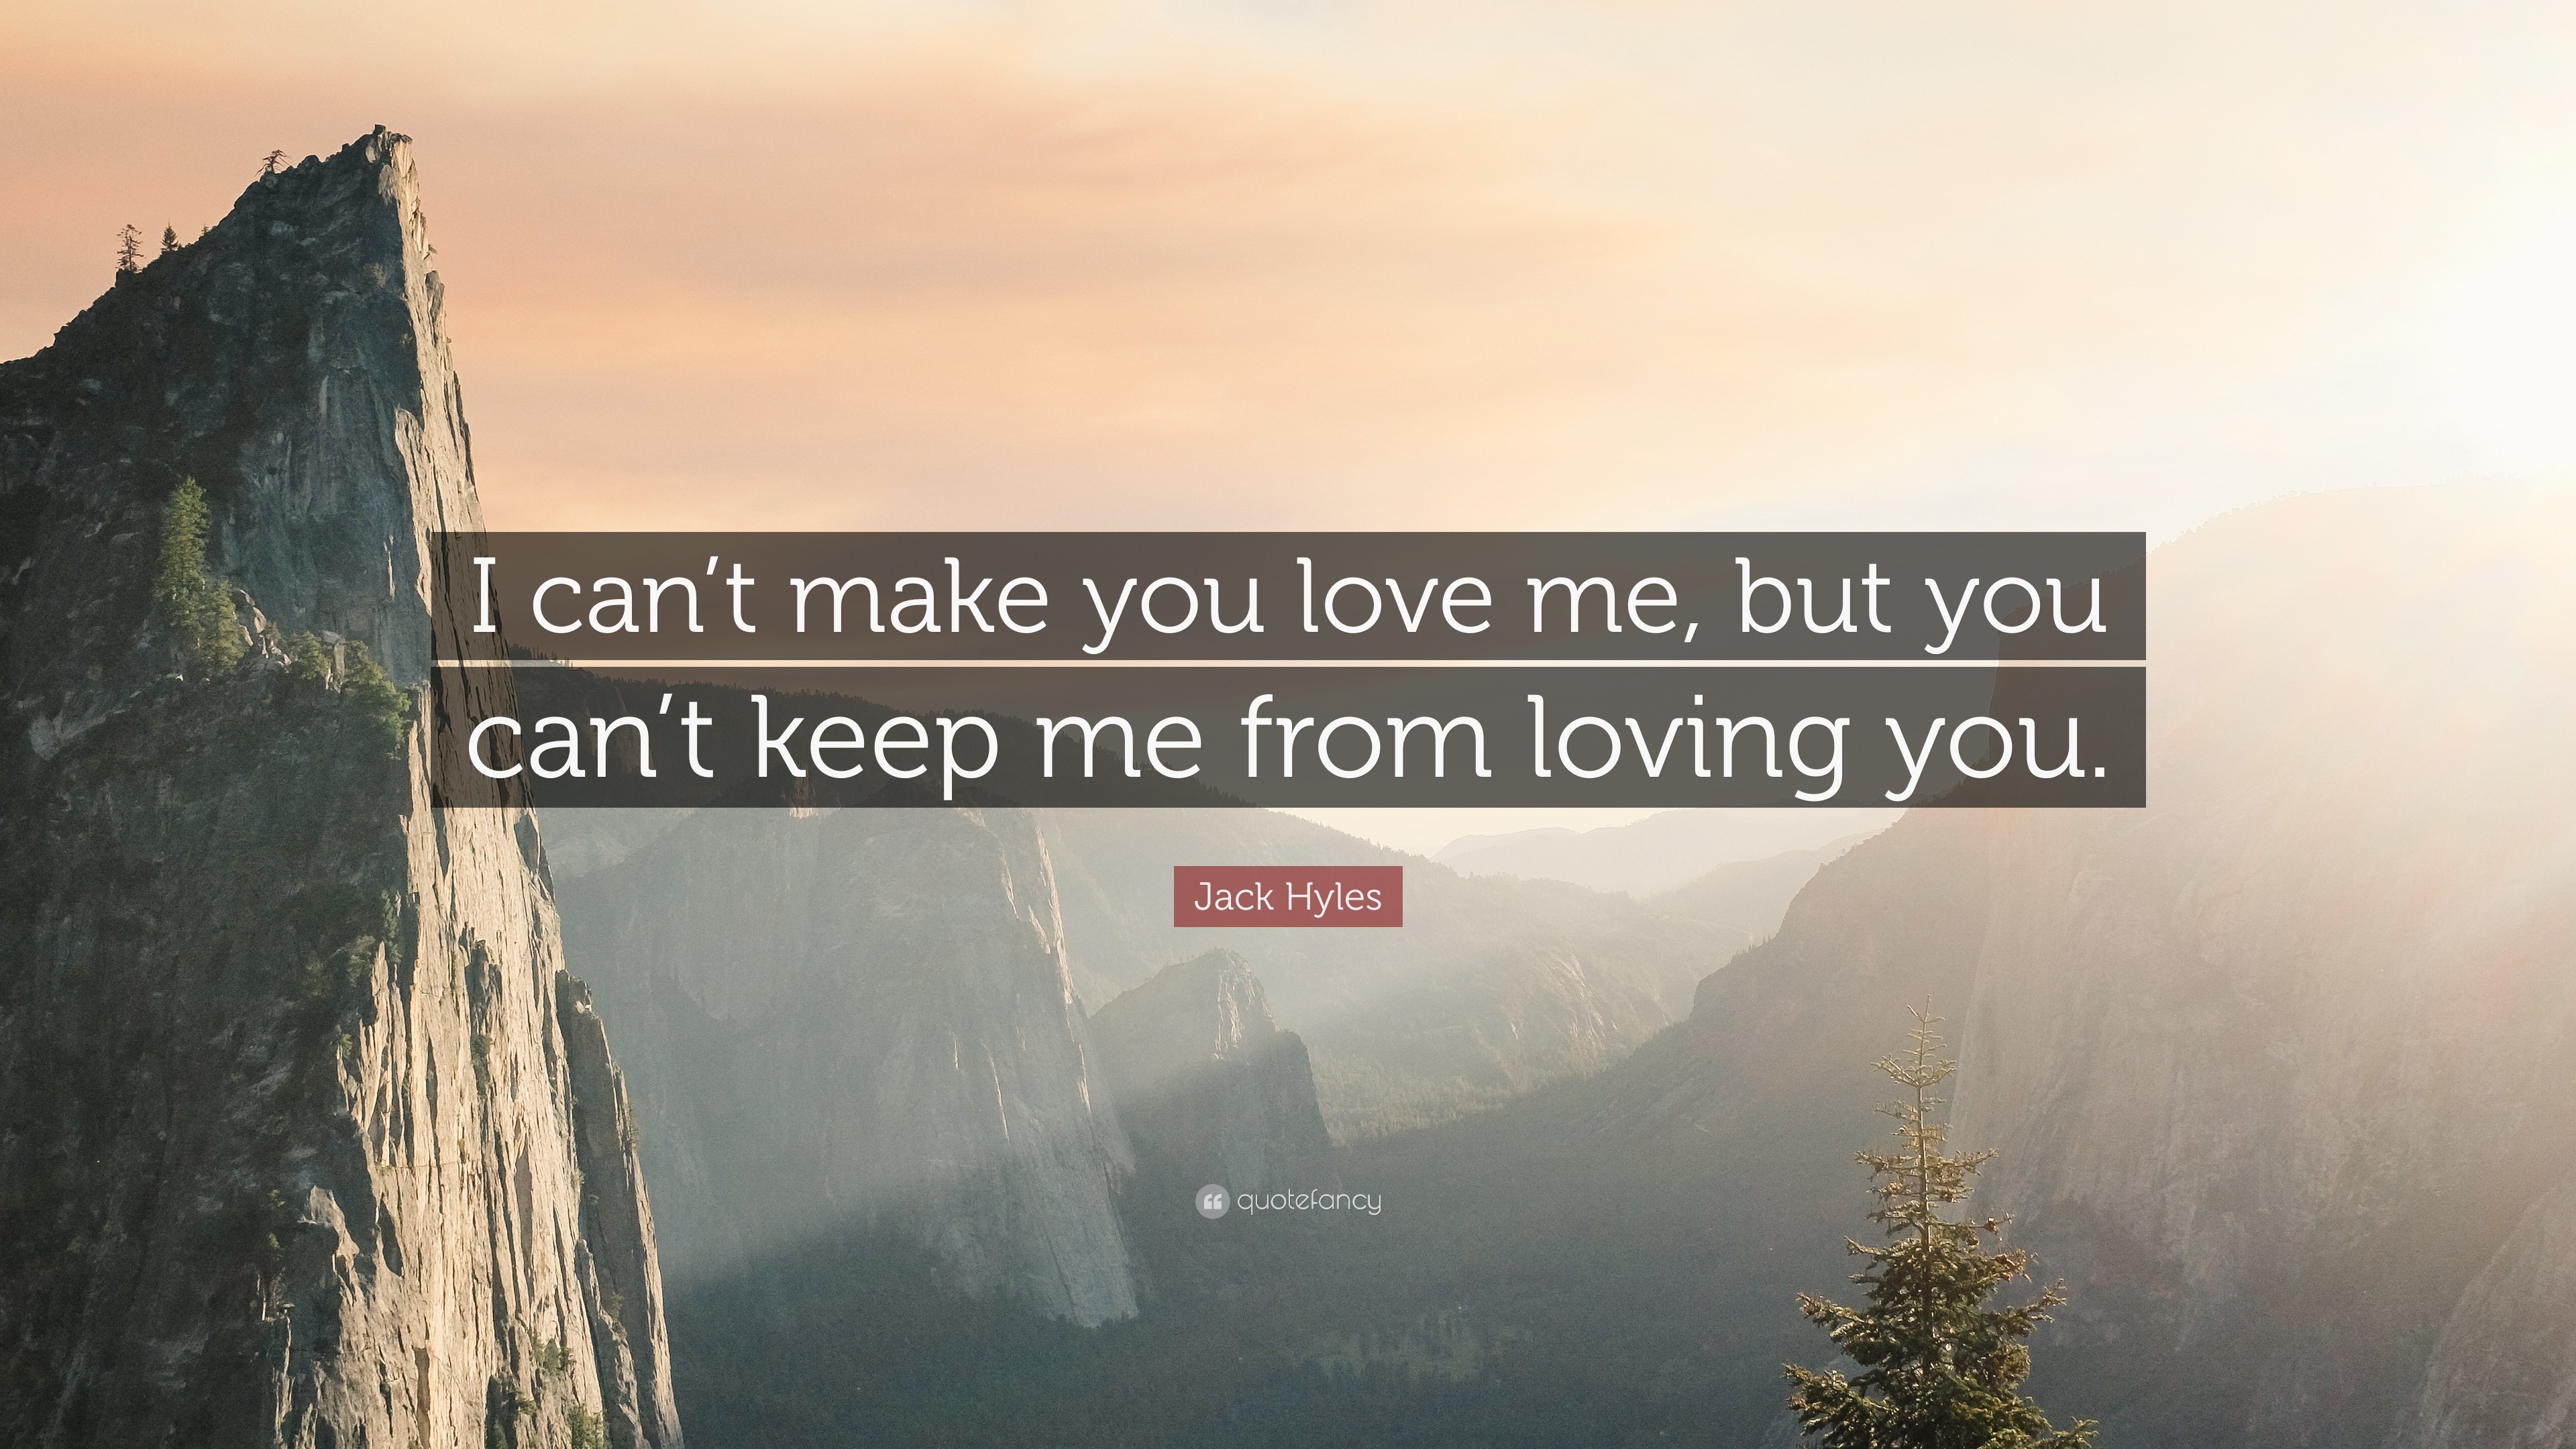 Jack Hyles Quote “I can t make you love me but you